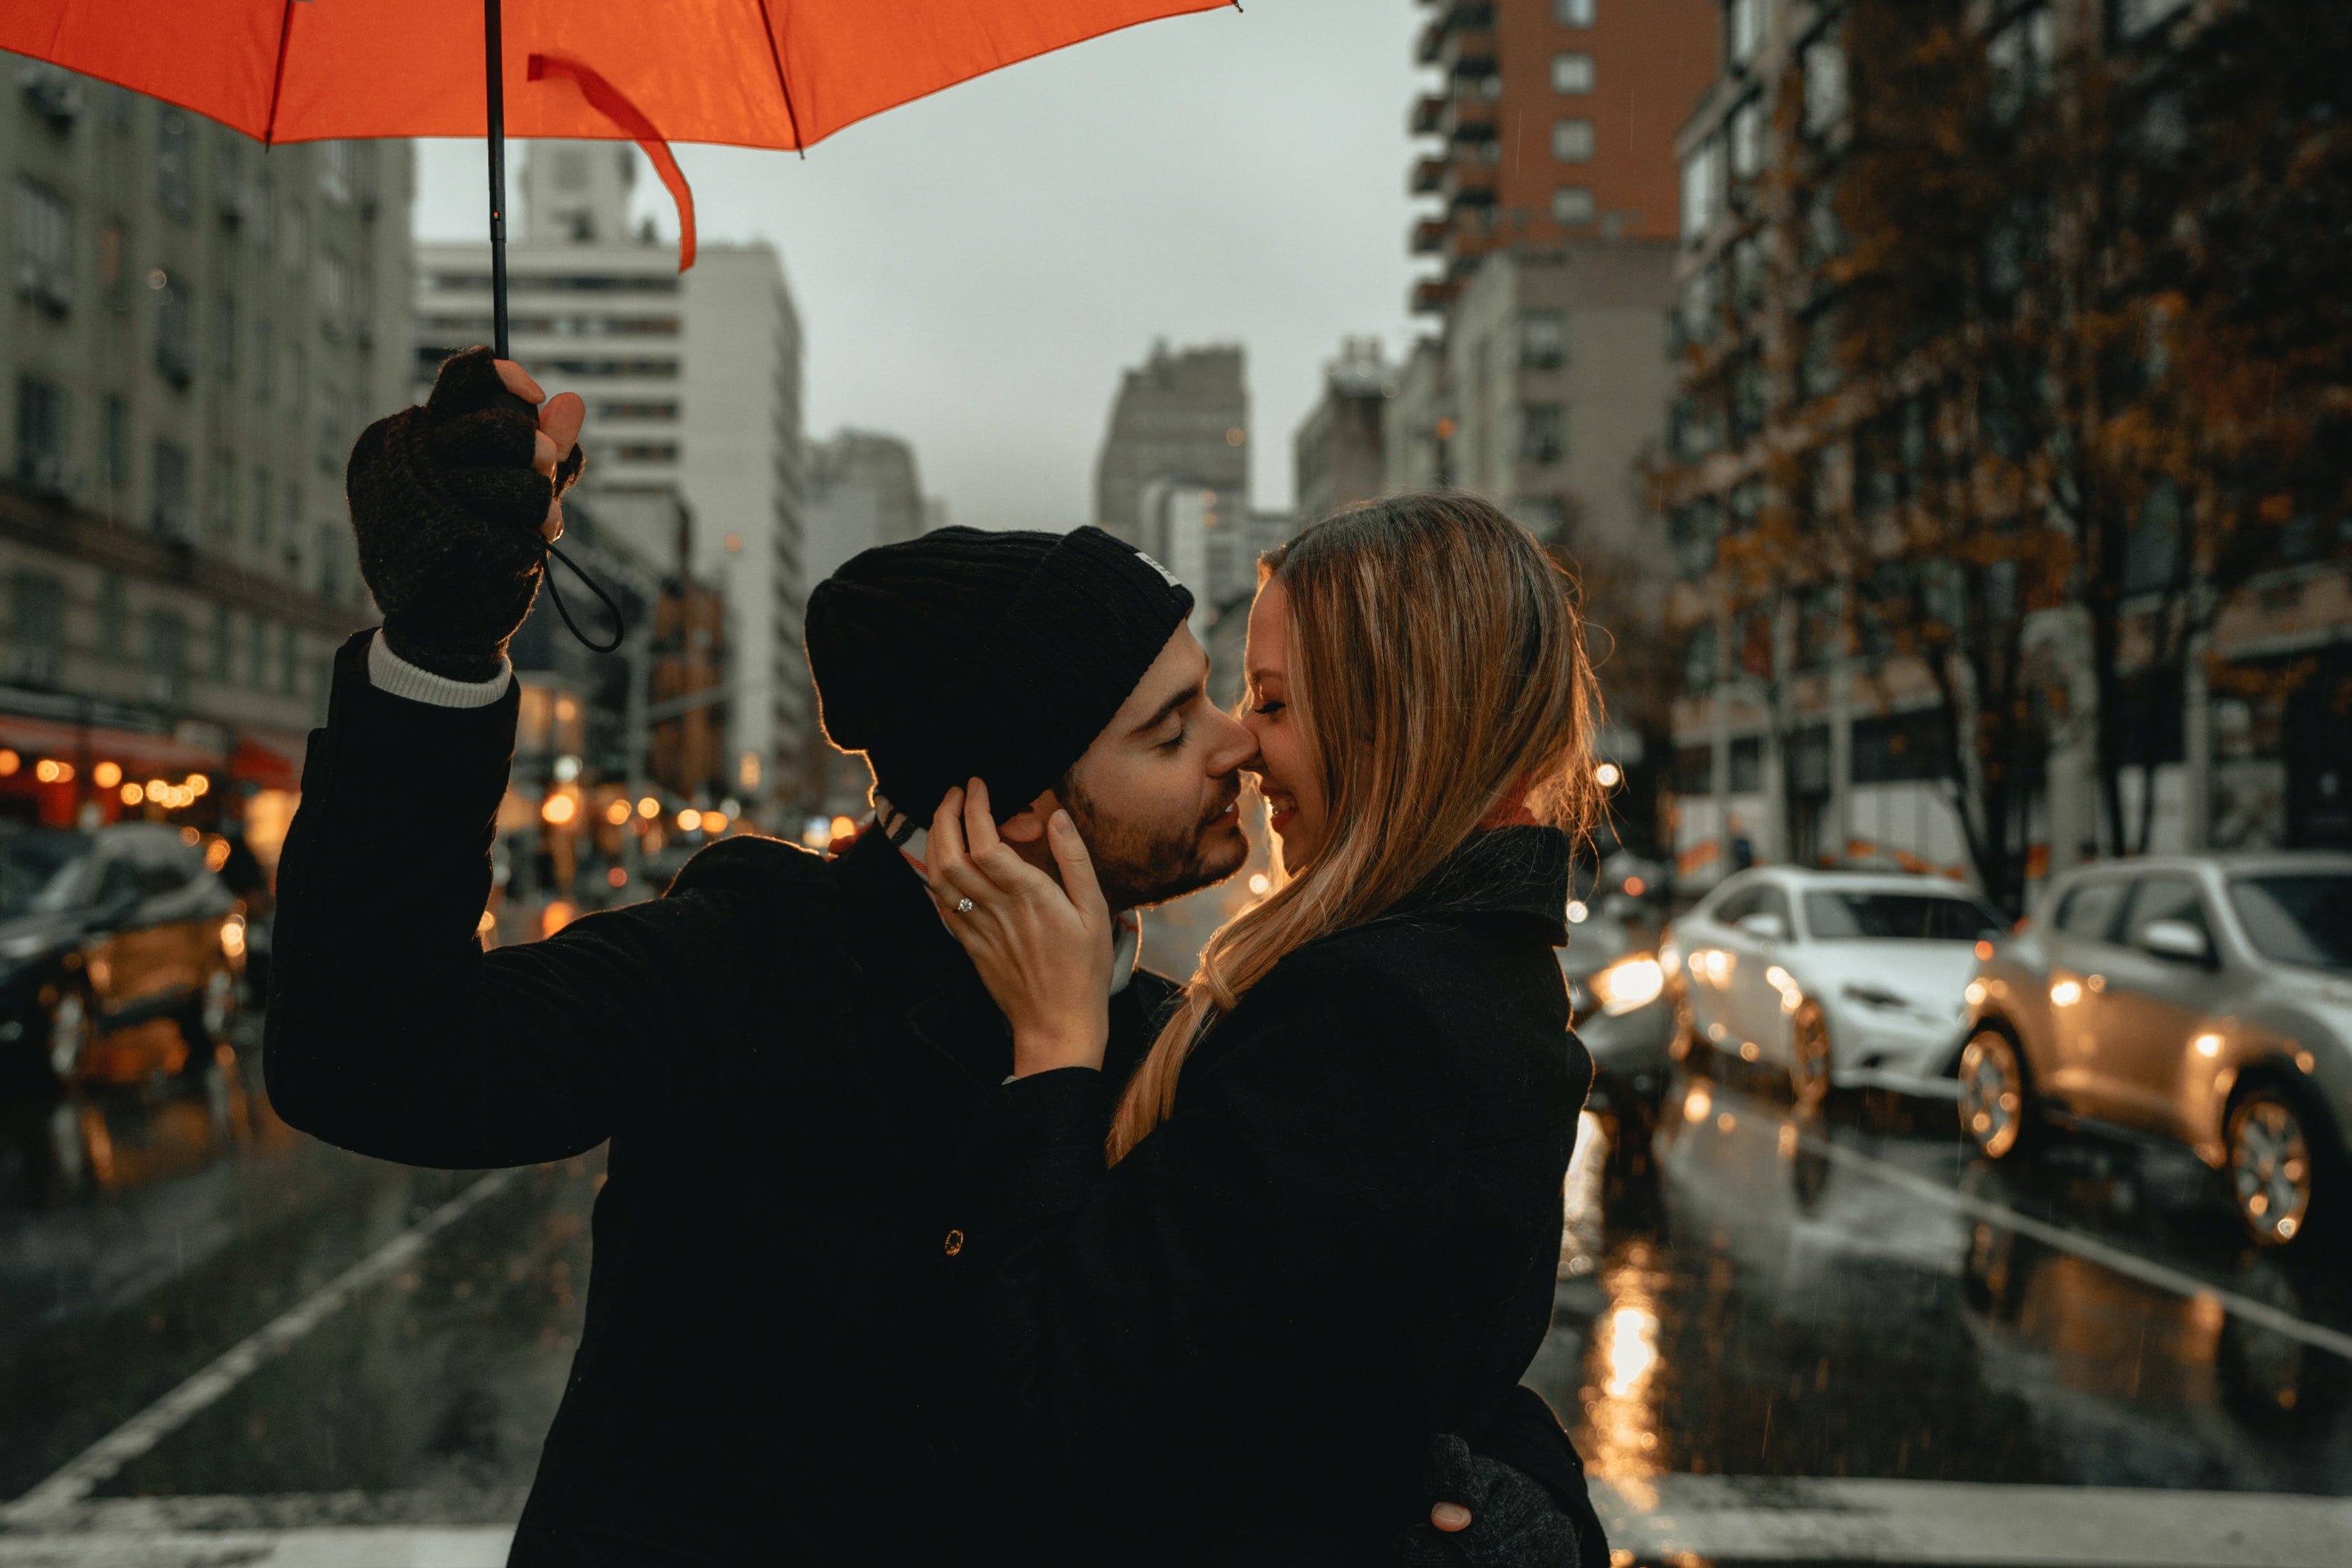 Gregory and Alice fell in love at first sight. | Source: Unsplash